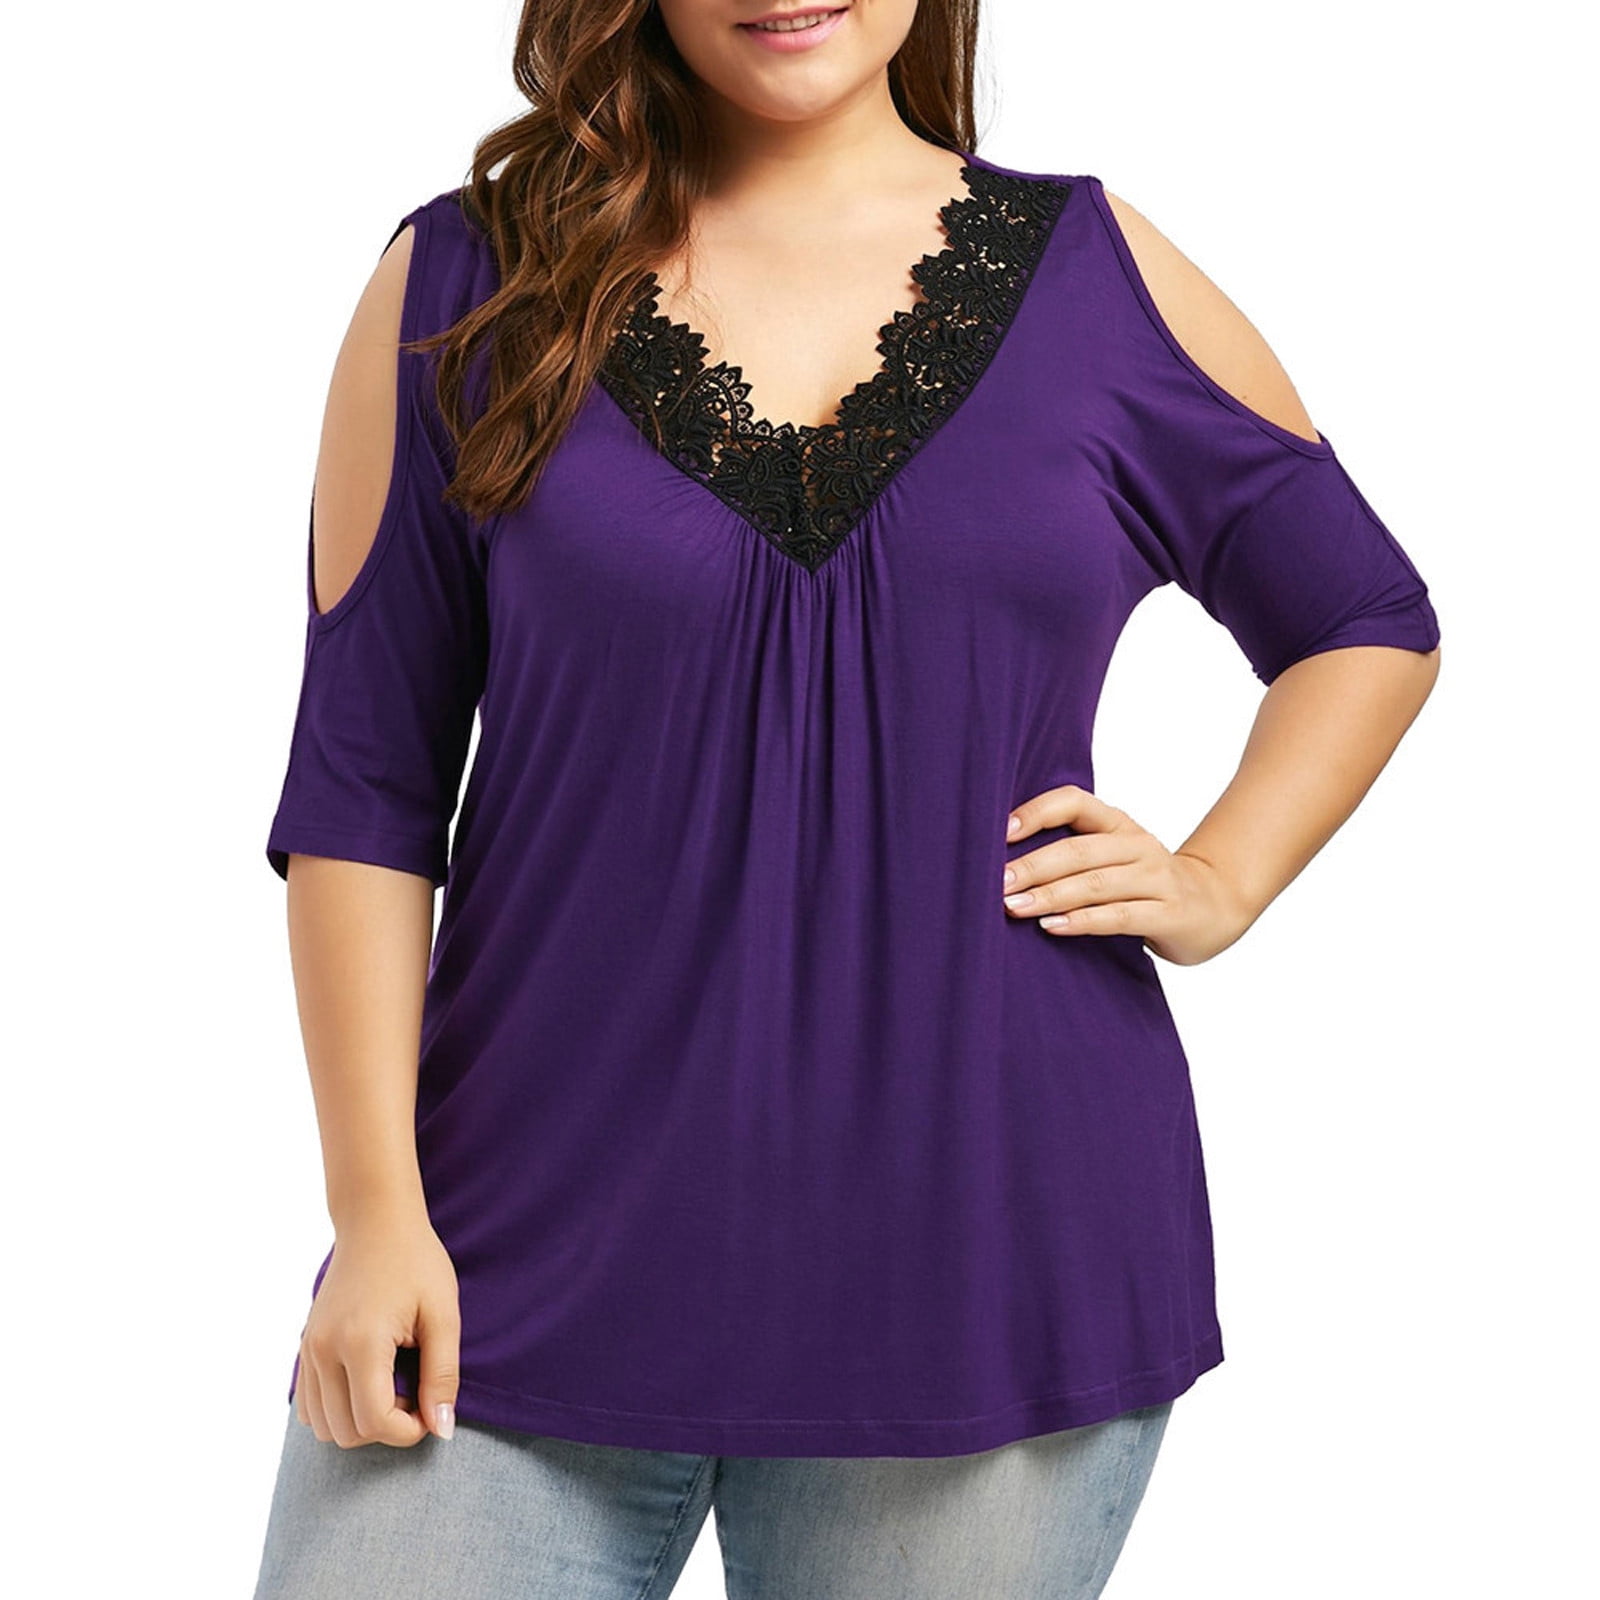 NEW Women Plus Size Cold Shoulder Strapless Lace Short Sleeve T-shirt Tops HOT